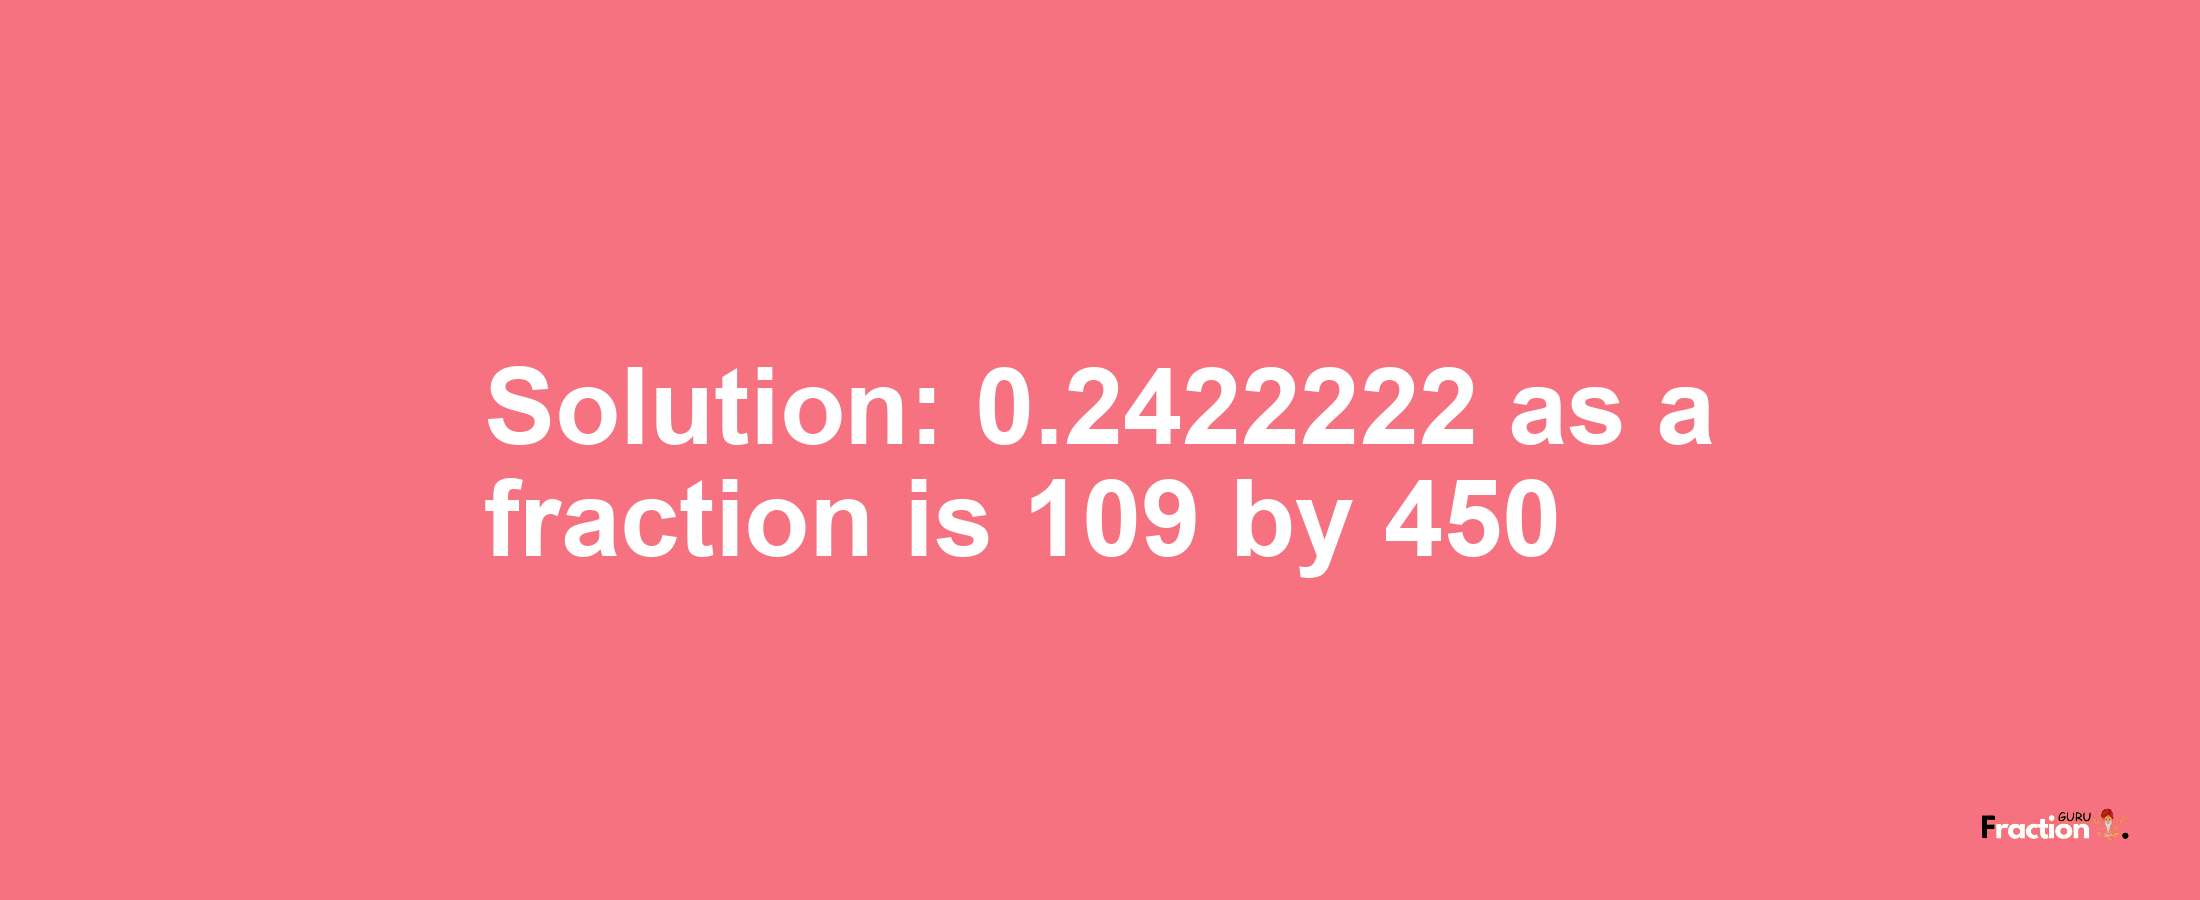 Solution:0.2422222 as a fraction is 109/450